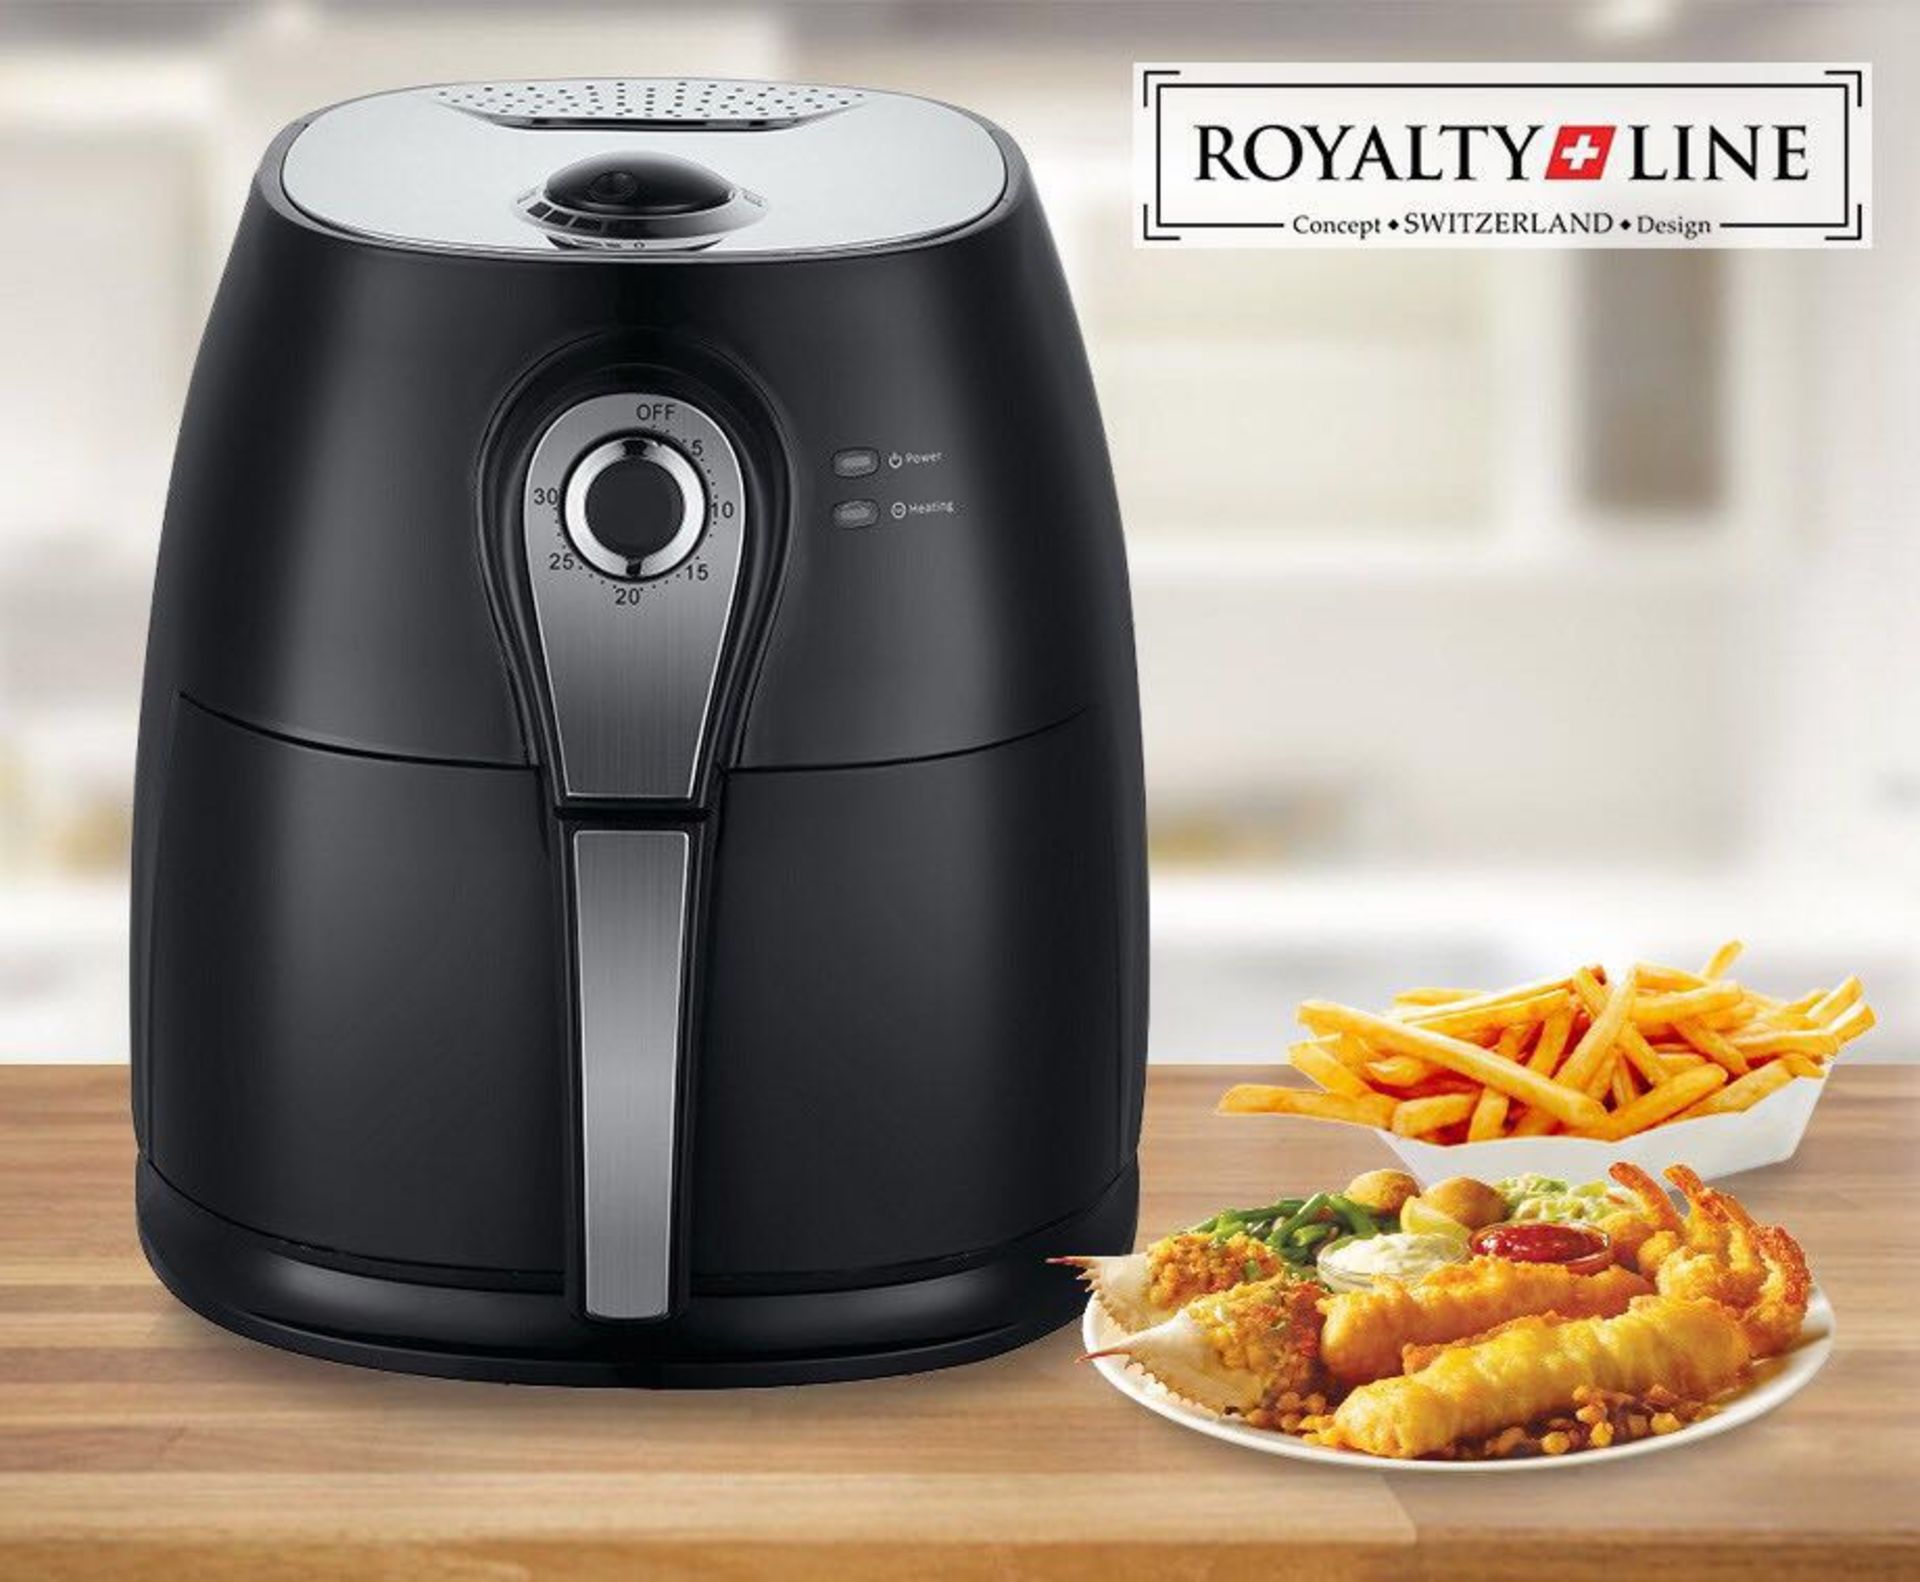 V Brand New Air Fryer 1400w Black Rapid Air Technology - no Oil Smell No Mess - Fry Grill Roast